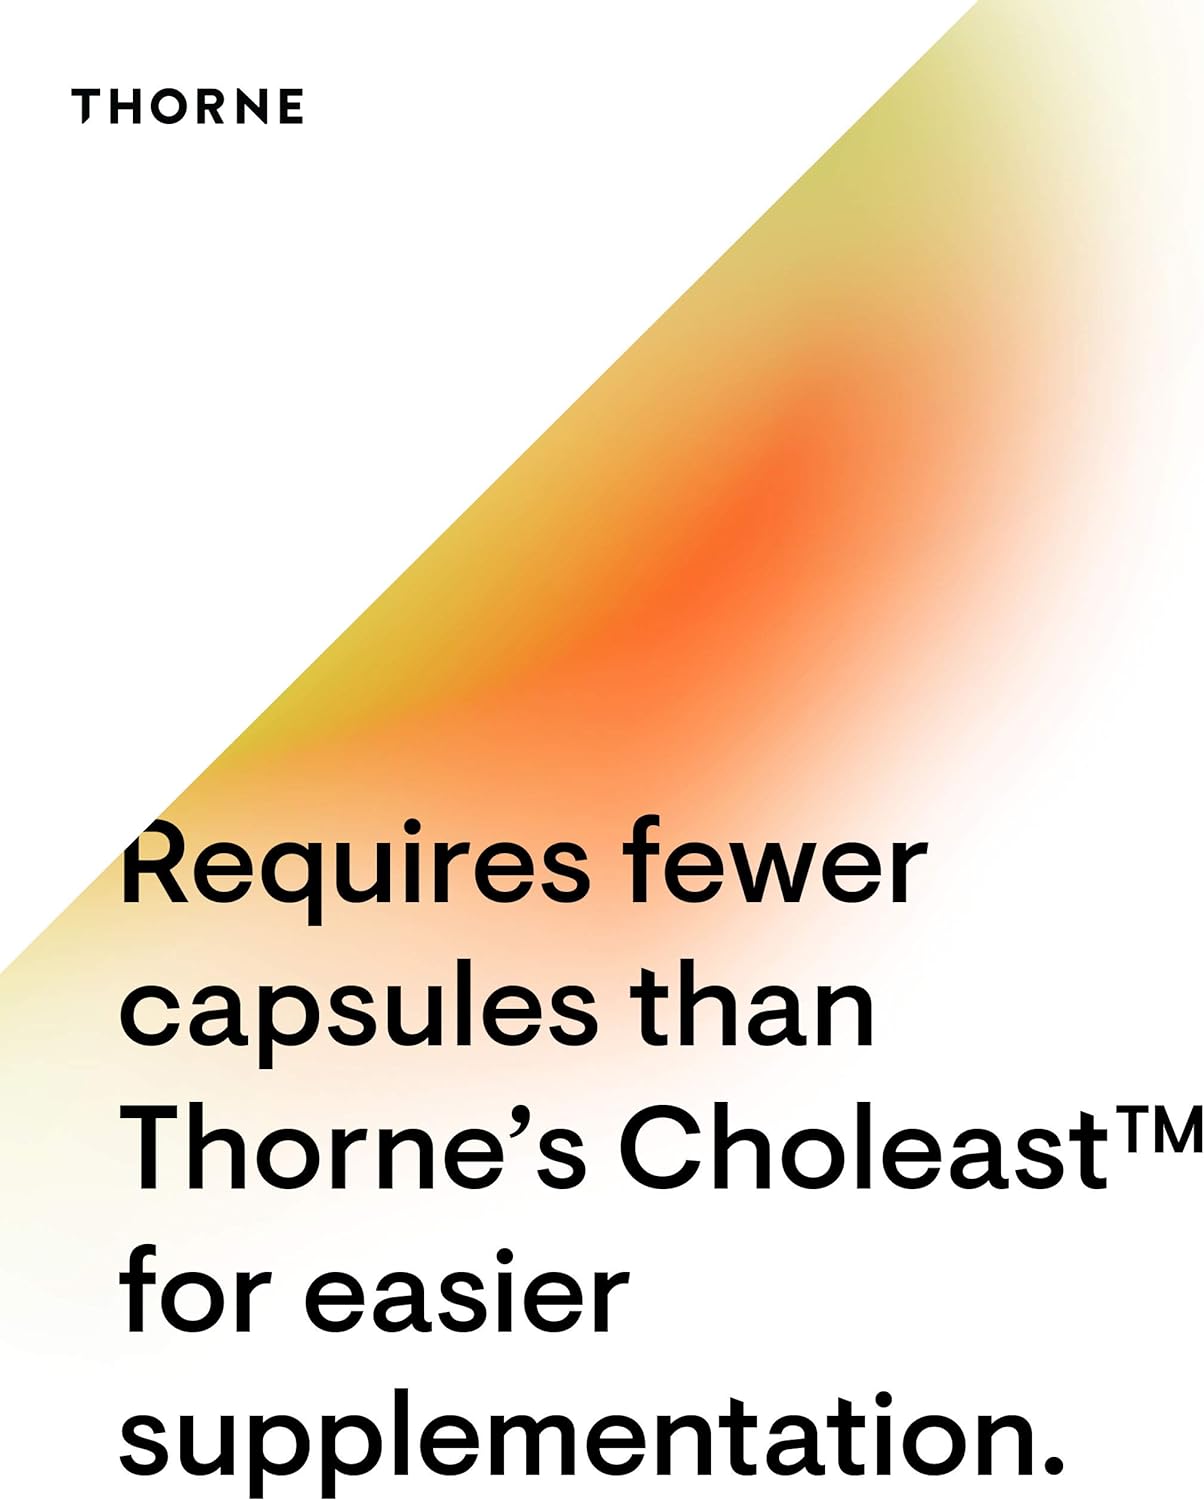 THORNE Choleast-900-900mg Red Yeast Rice Extract - Gluten-Free Supplement Supports Healthy Cholesterol Levels Already in a Normal Range, Heart & Blood Pressure - 120 Capsules : Health & Household